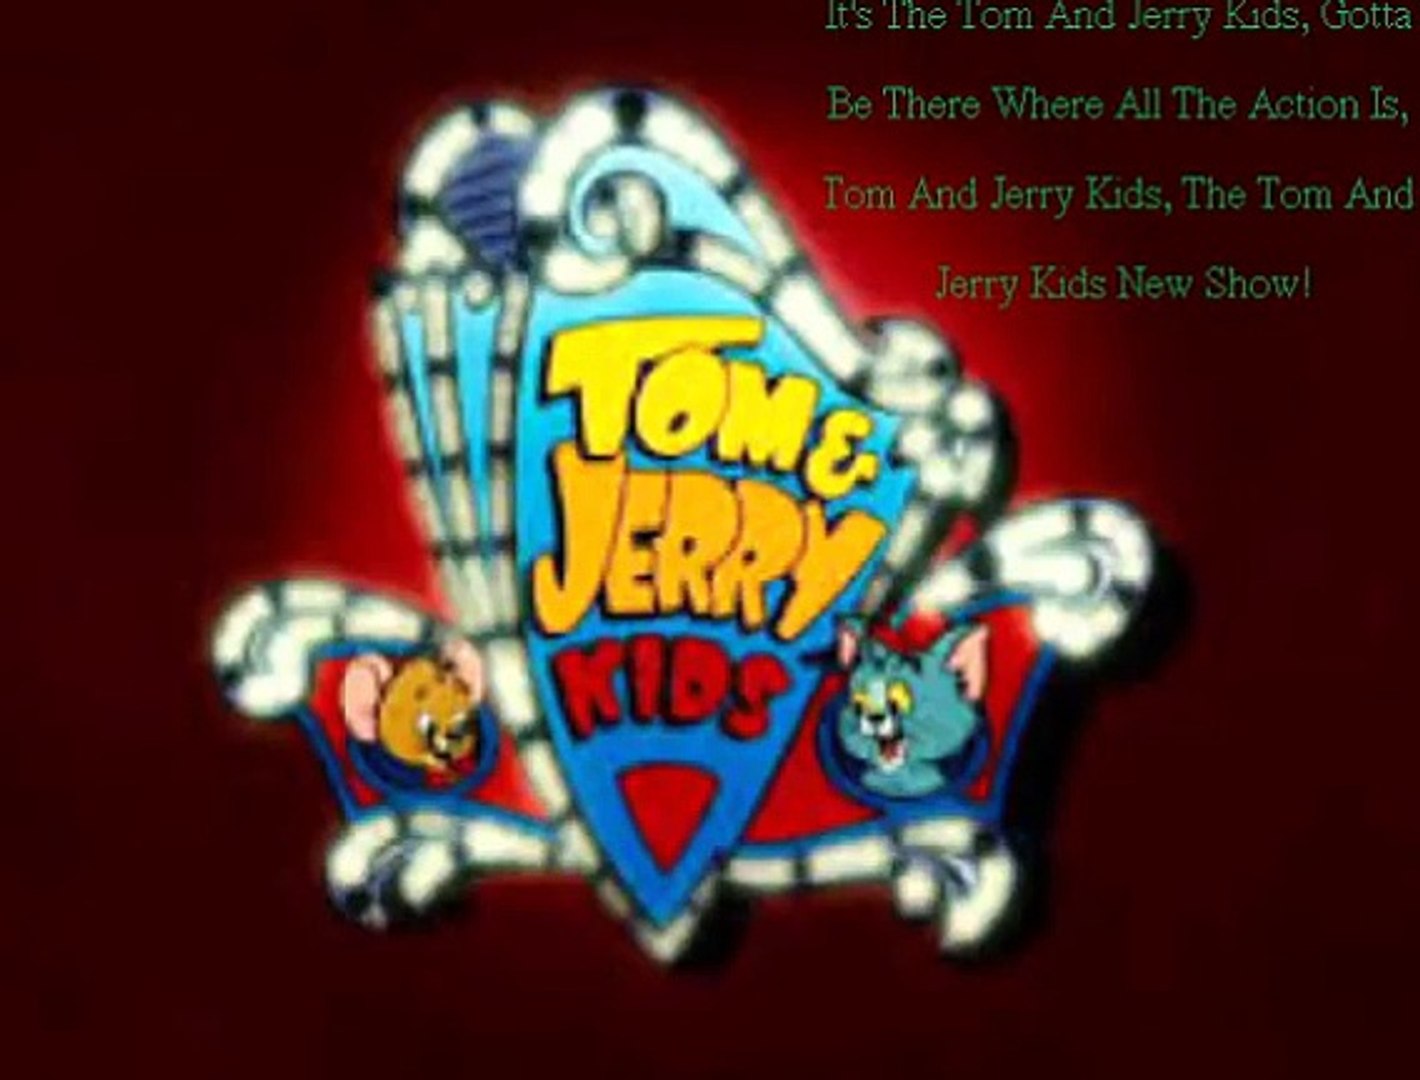 Tom And Jerry Kids Theme Song Lyrics - Dailymotion Video